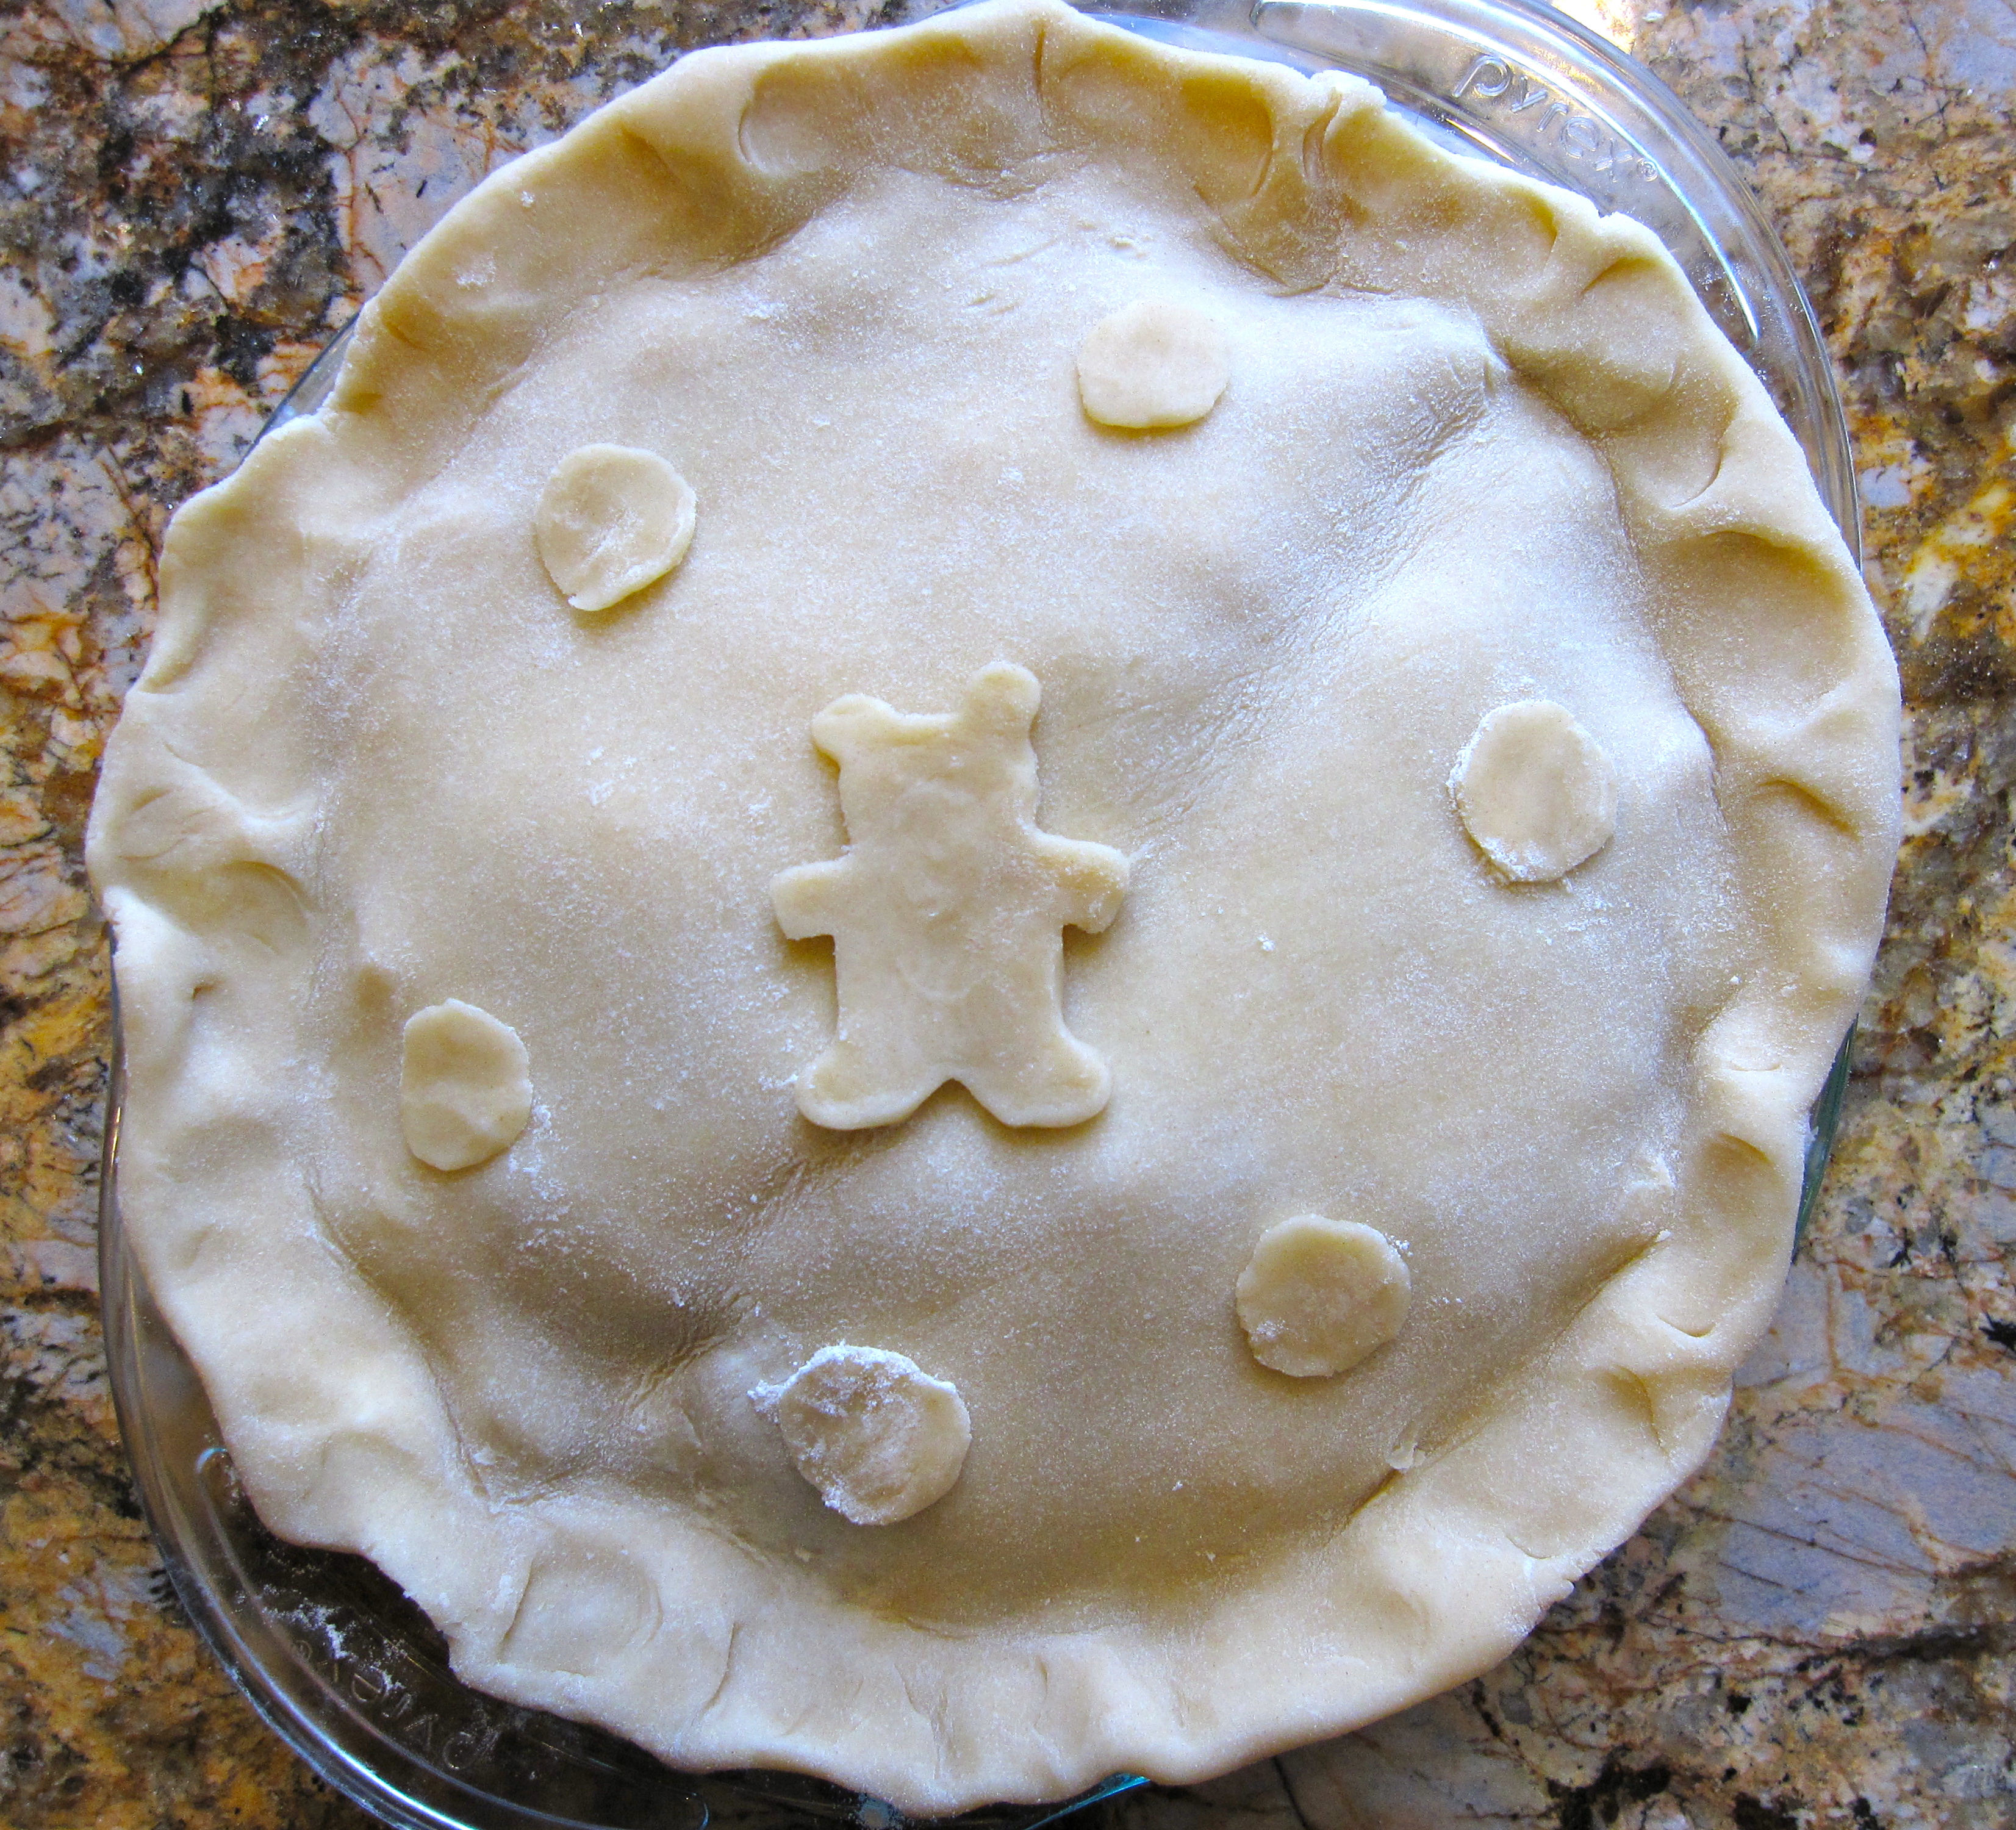 PIe topped with crust with decorative pie crust pieces in shape of a bear and circles.